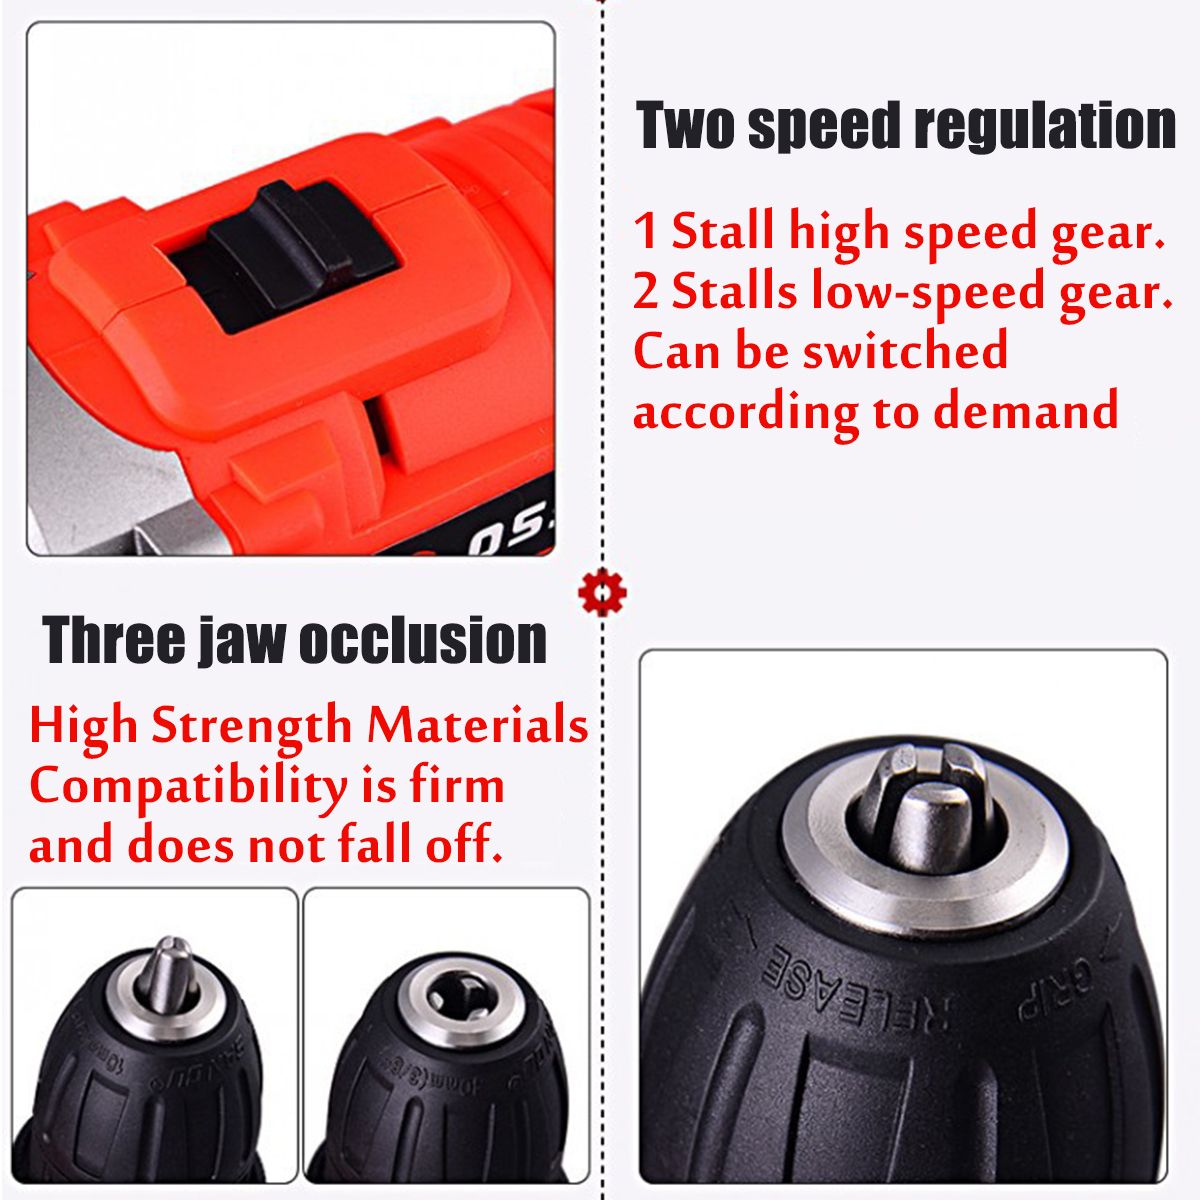 300W-21V-LED-Cordless-Electric-Drill-Screwdriver-1500mAh-Rechargeable-Li-Ion-Battery-Repair-Tools-1421882